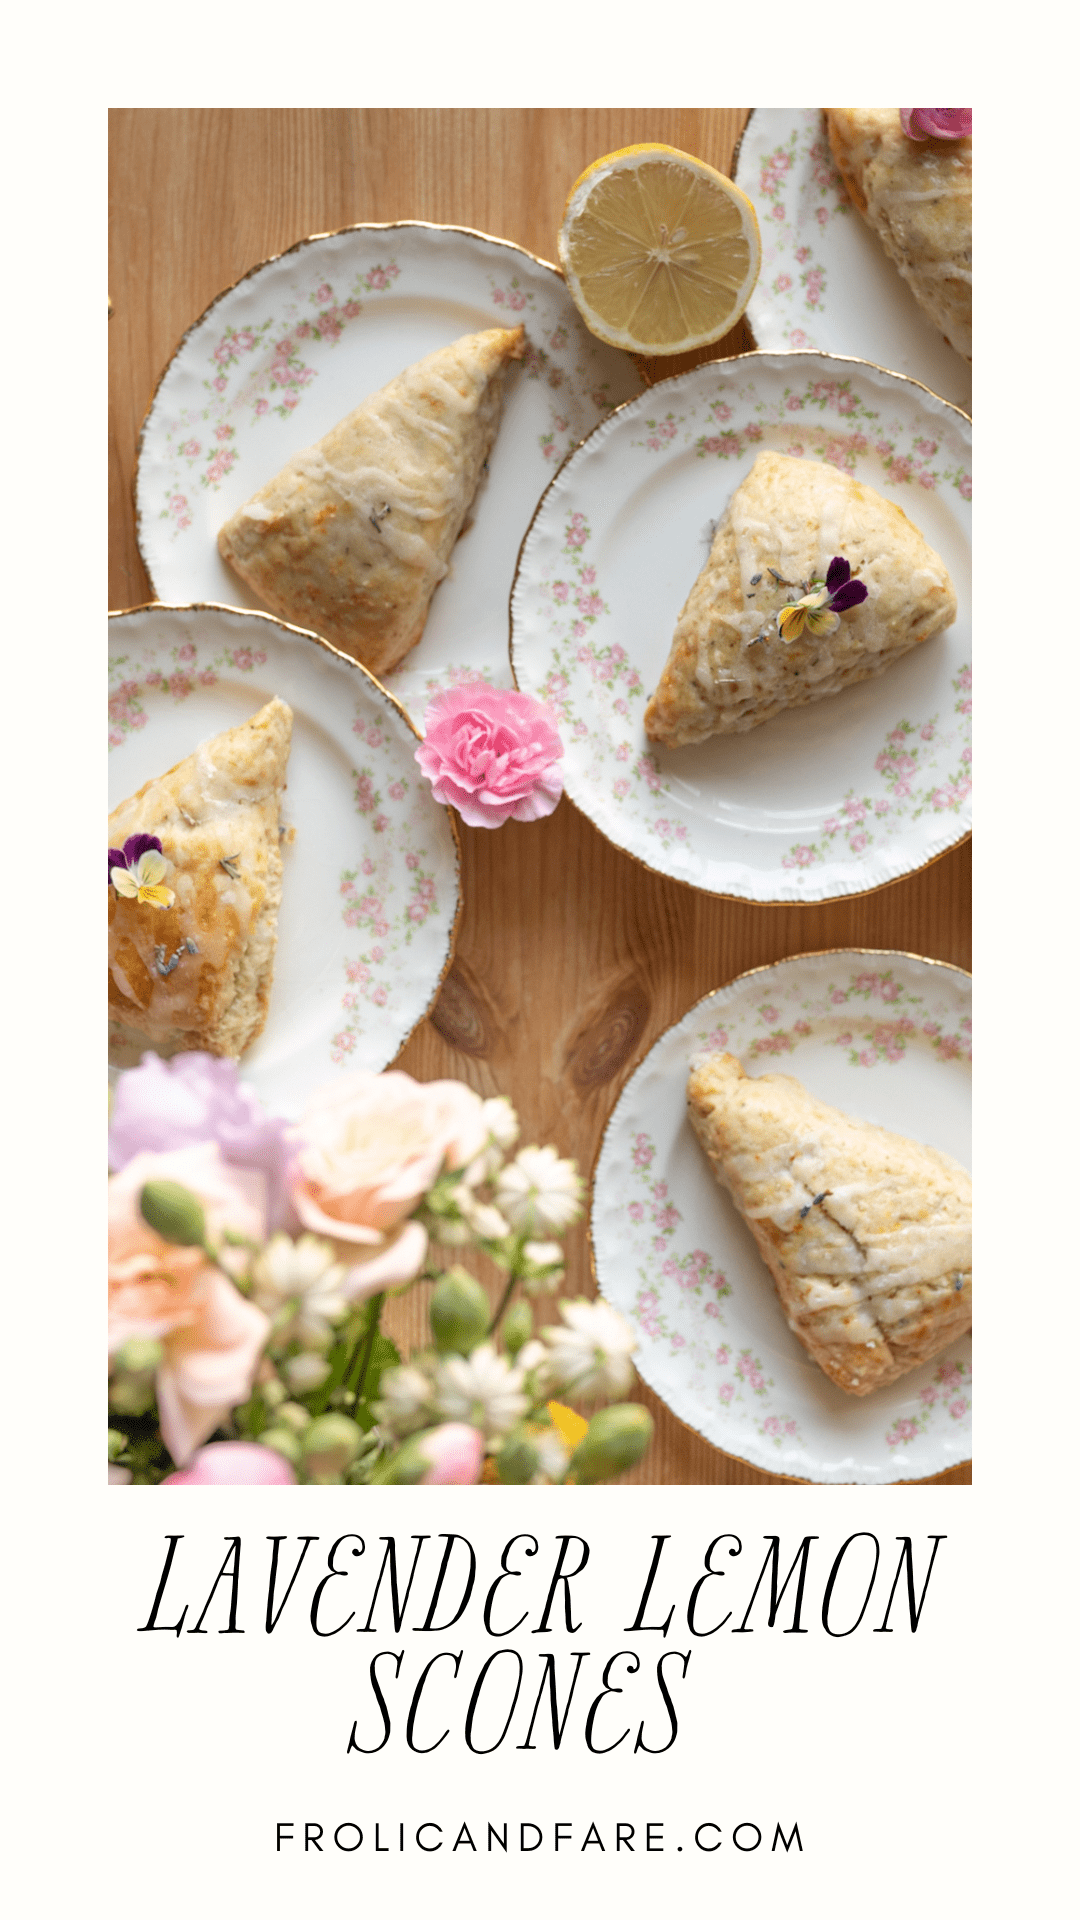 PINTEREST GRAPHIC WITH TEXT "LAVENDER LEMON SCONES" with scone facing all different directions on vintage tea plates